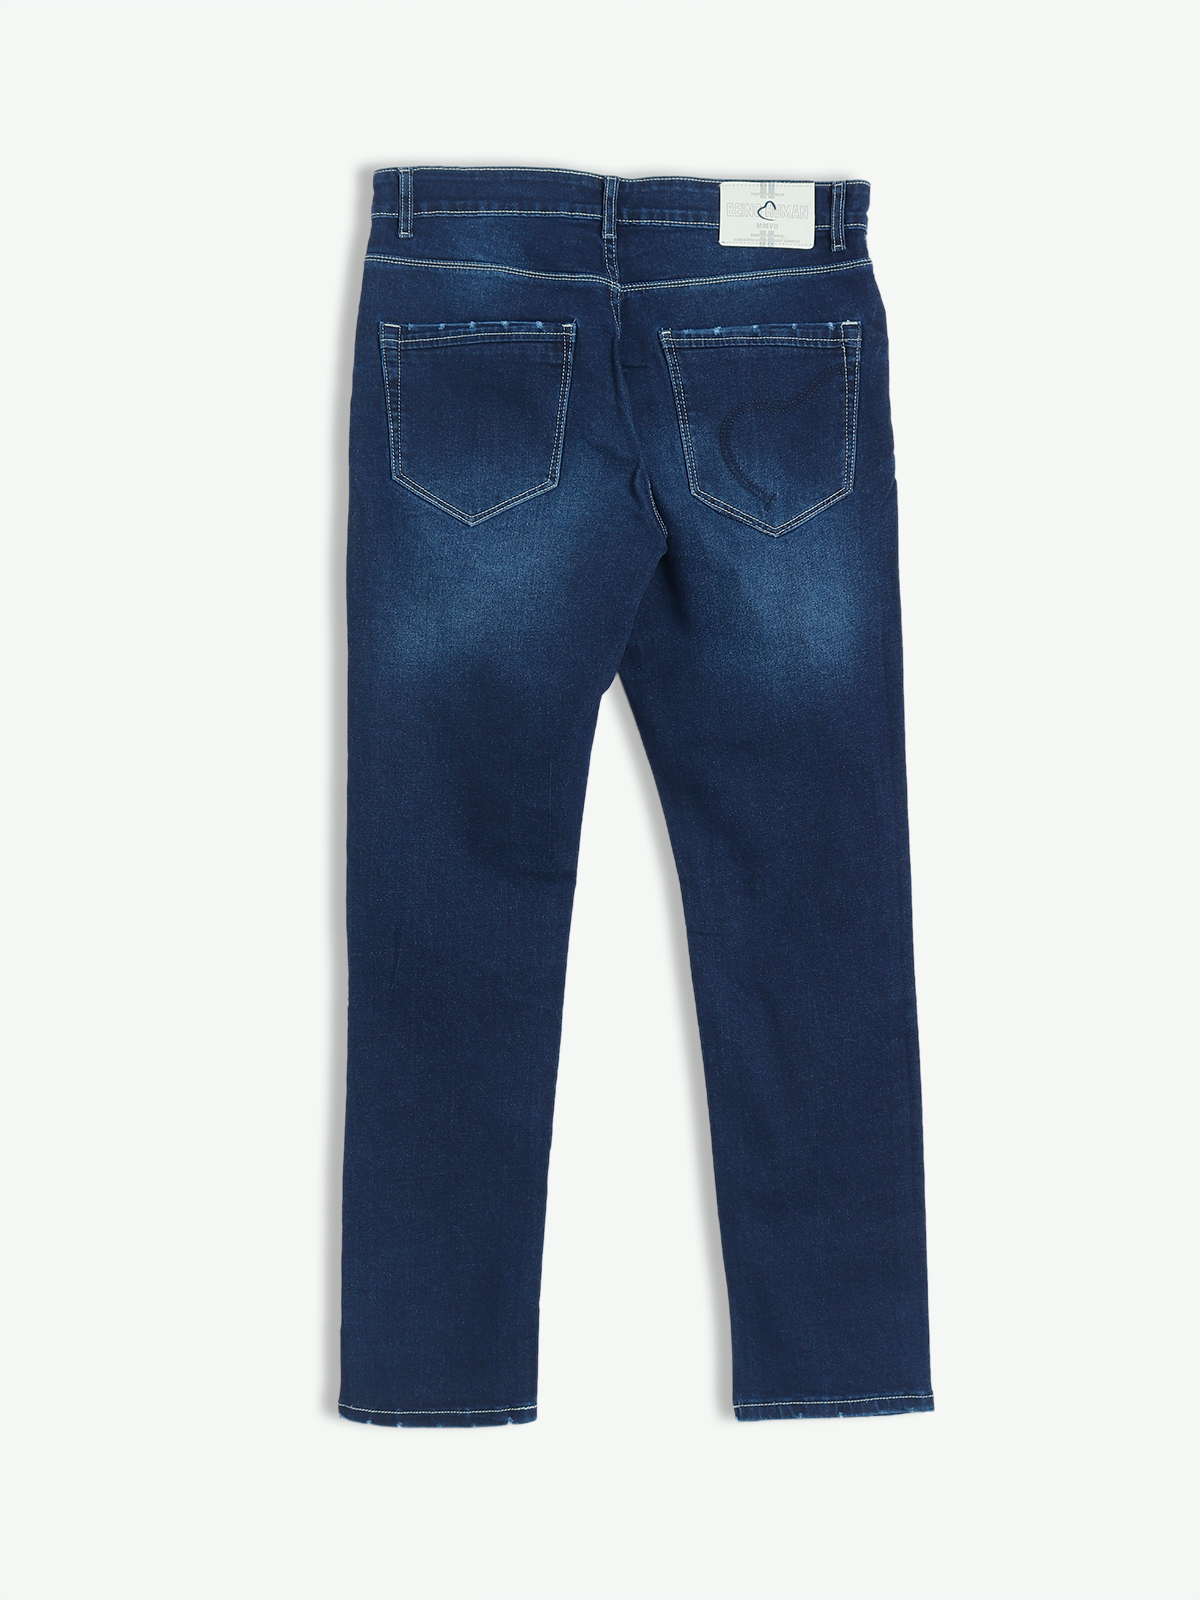 Looking for Men Jeans Styles Store Online with International Courier? | Denim  jeans ideas, Mens fashion jeans, Men fashion casual outfits